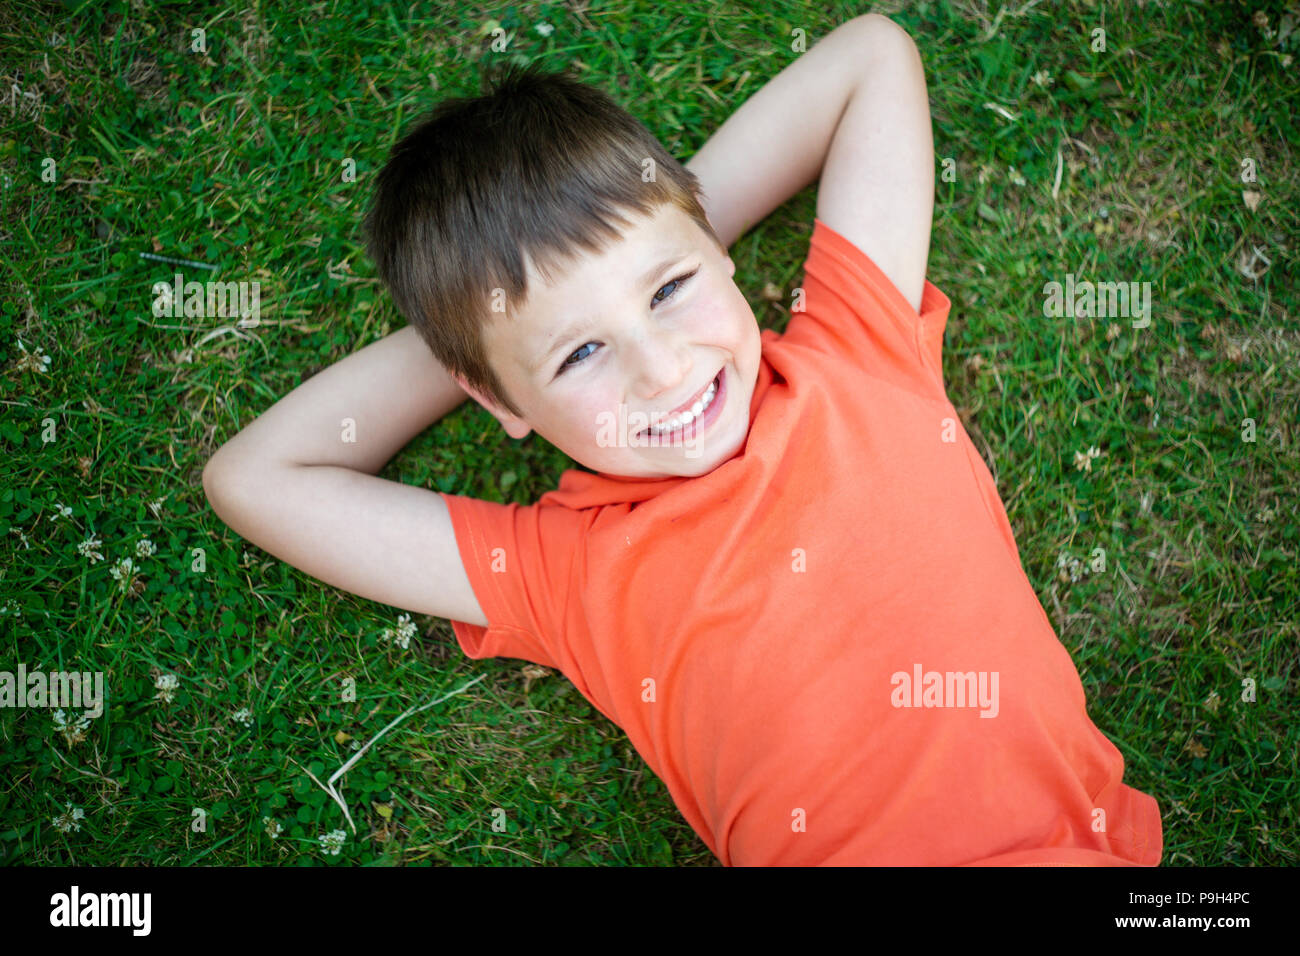 Cute happy 6 years old boy lying on green grass and smiling. Stock Photo